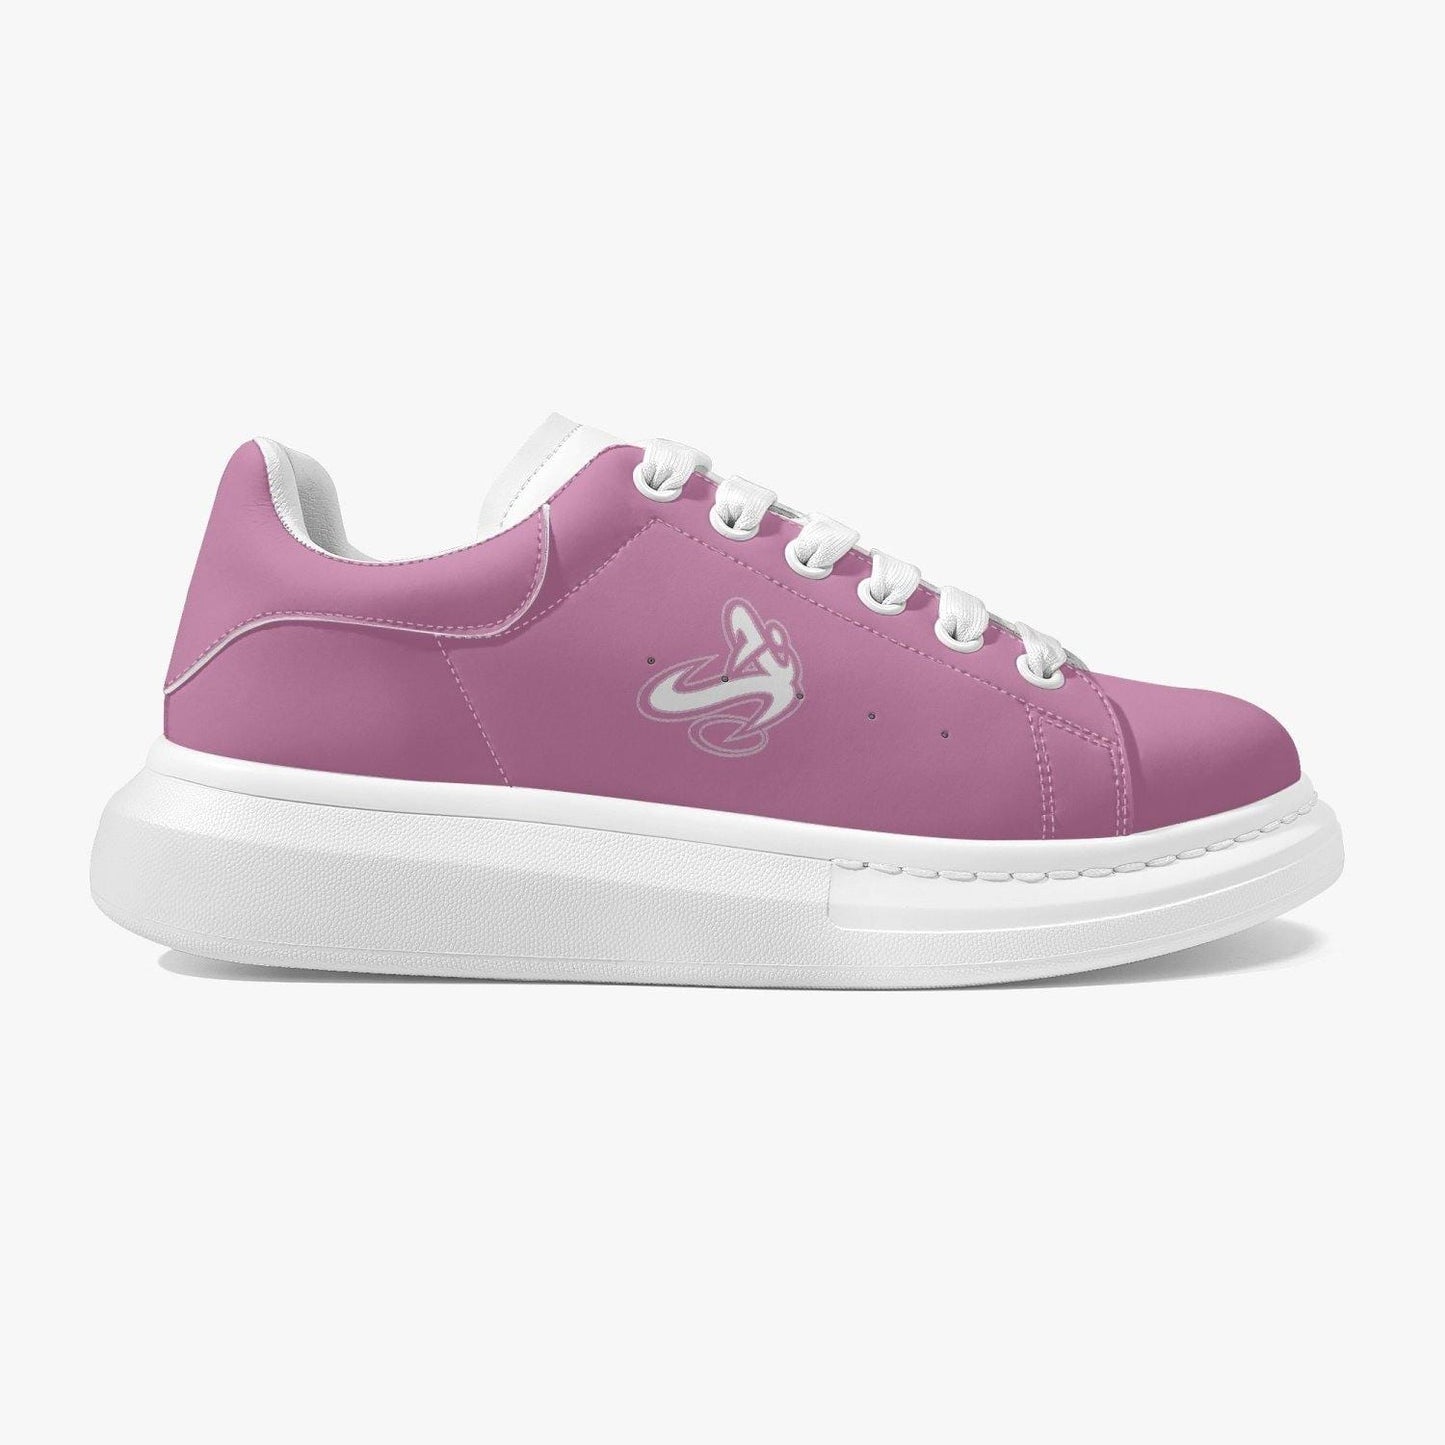 Athletic Apparatus Pink 1 Lifestyle Low-Top Leather Sneakers - Athletic Apparatus